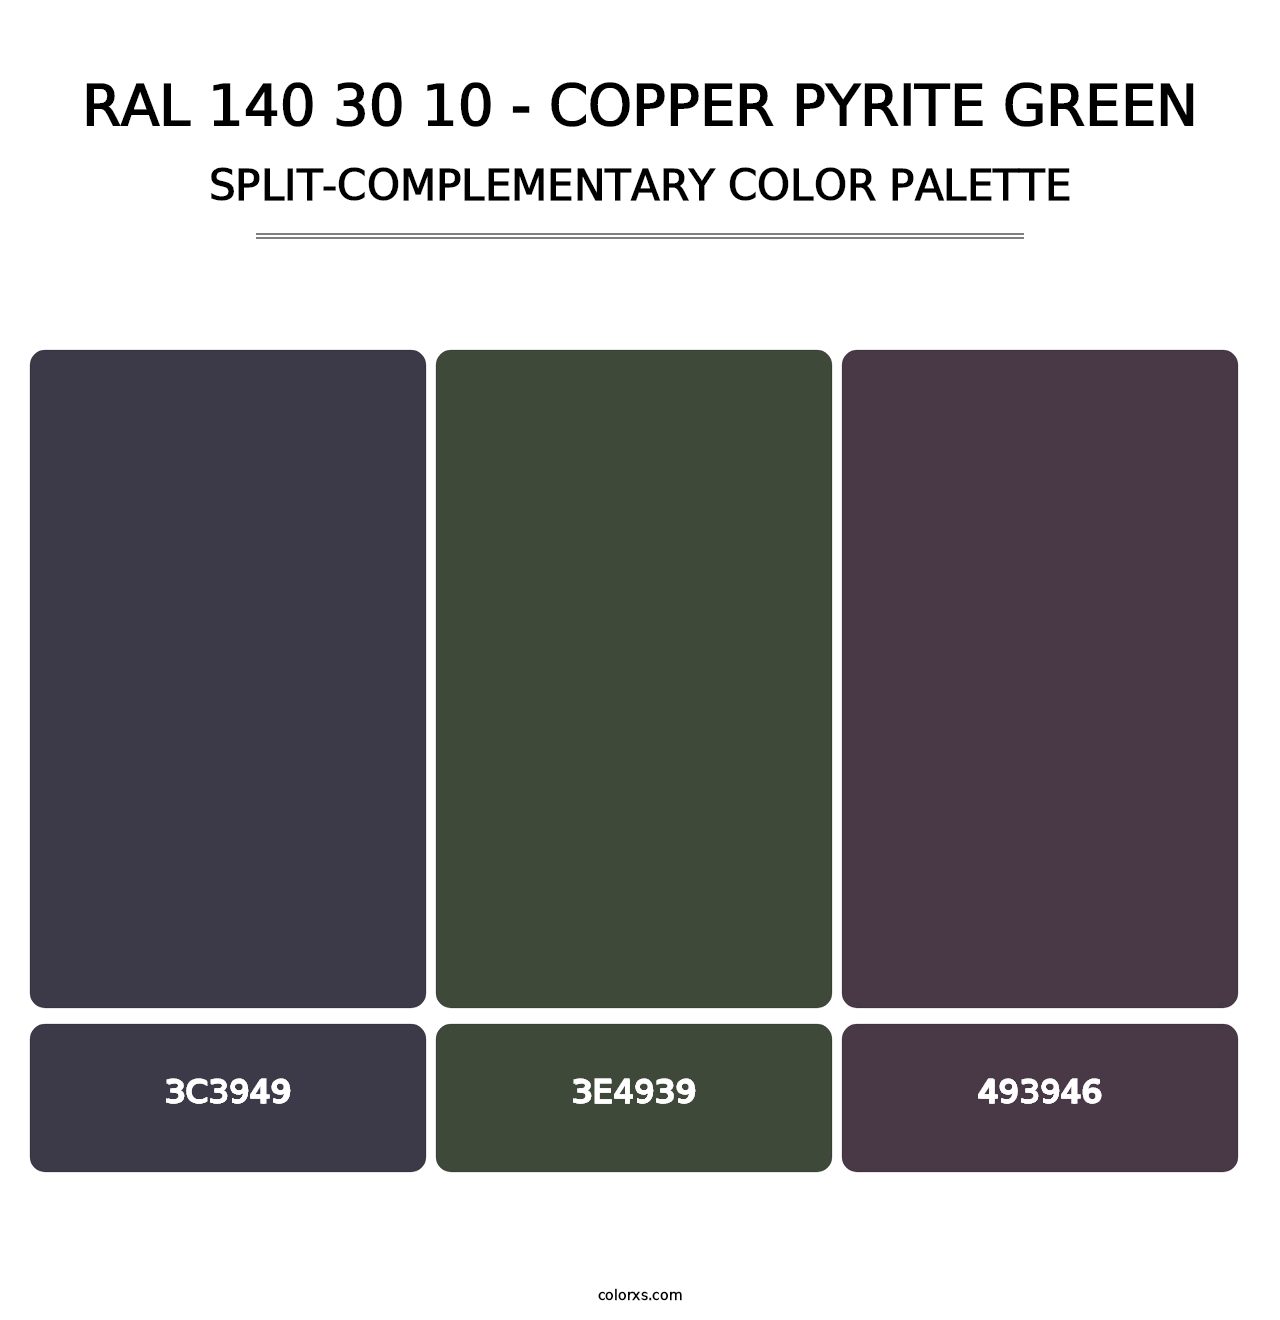 RAL 140 30 10 - Copper Pyrite Green - Split-Complementary Color Palette